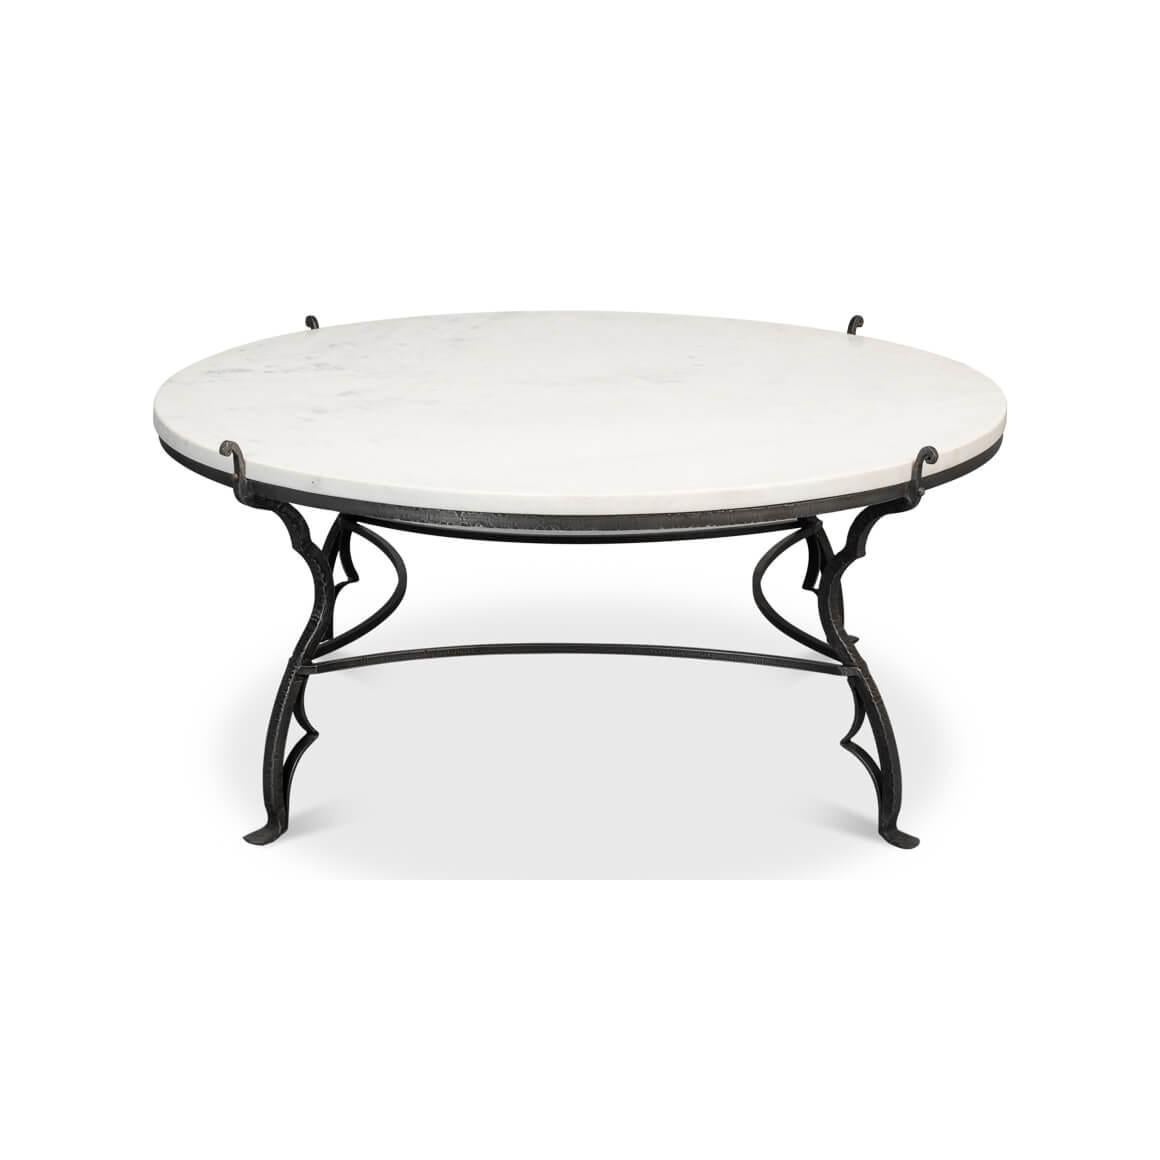 A masterpiece that melds the opulence of marble with the strength of wrought iron. This exquisite table boasts a generously sized, round white Baswara marble top, each pattern unique as a fingerprint. 

The hand-forged iron base is a work of art,